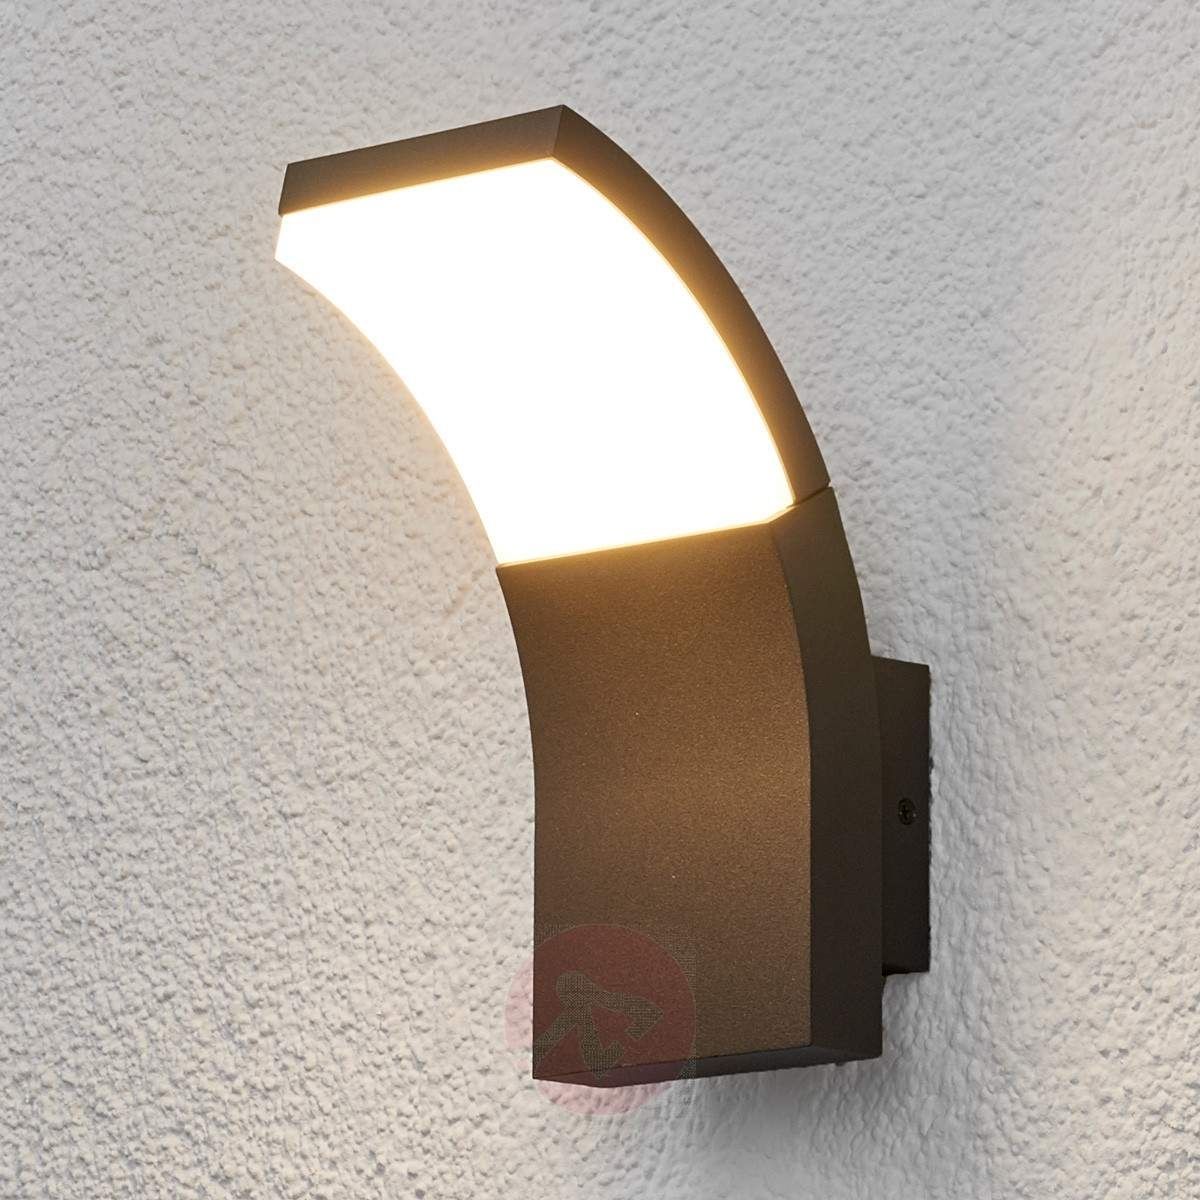 Led Outdoor Wall Light Timm | Lights.ie Throughout Outdoor Wall Led Lighting (Photo 4 of 15)